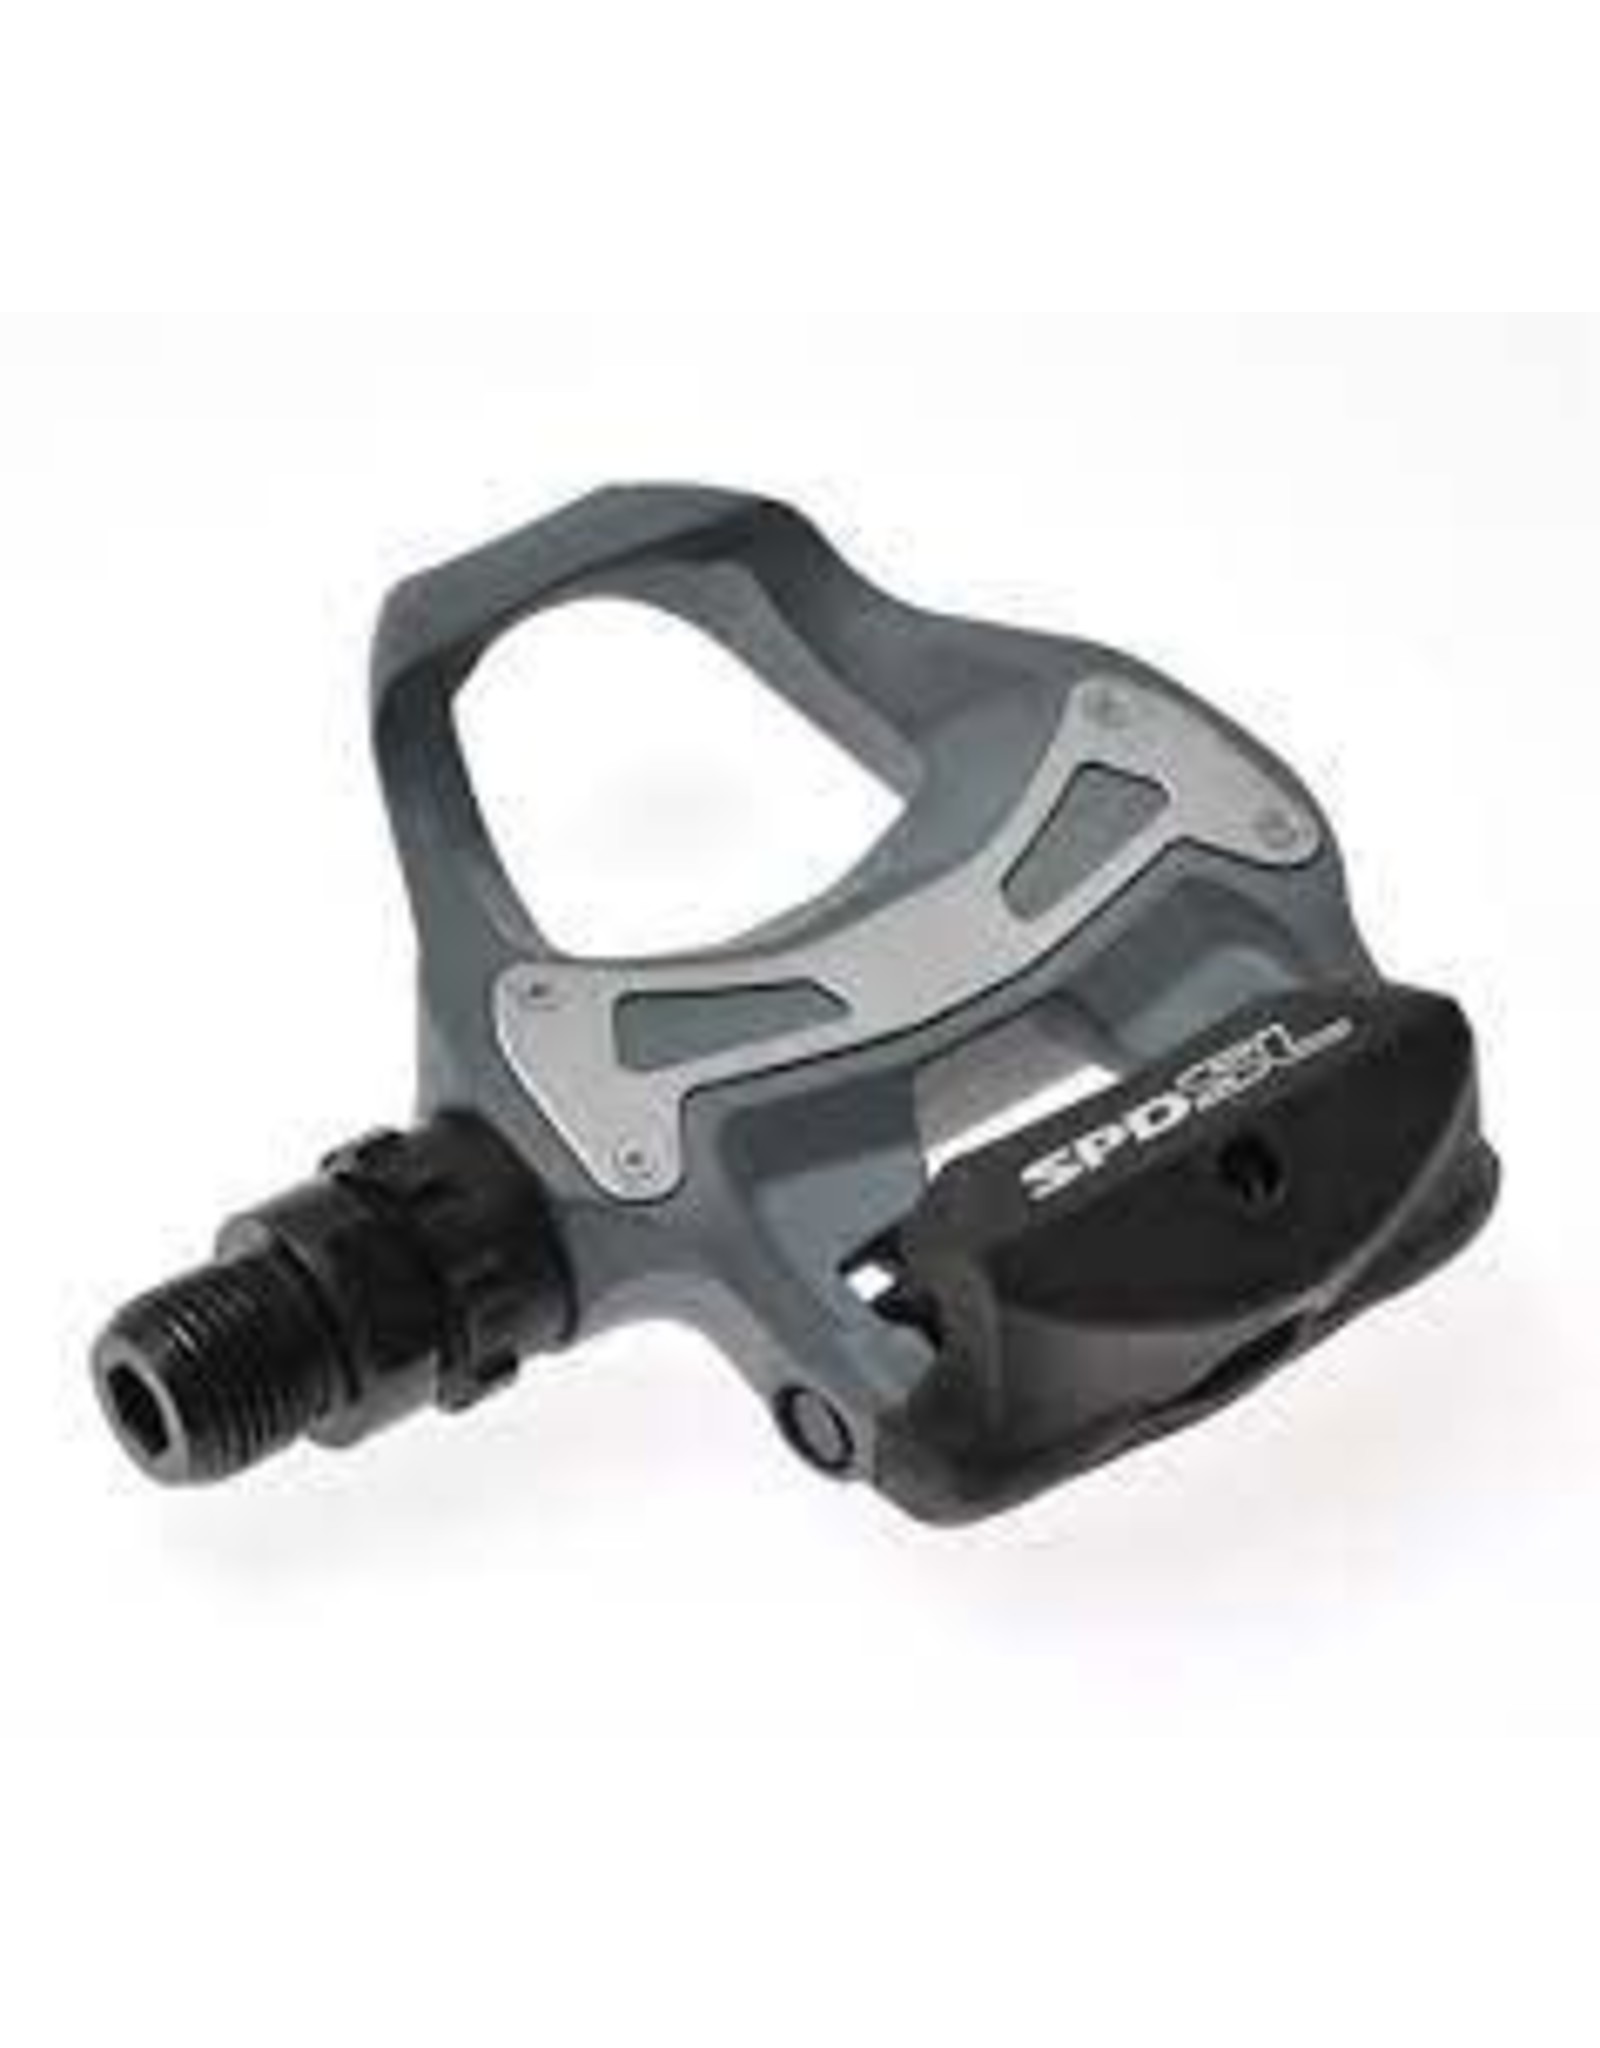 Shimano Shimano Road Clipless PEDAL PD-R550 SPD-SL W/ CLEAT (SM-SH11) Grey